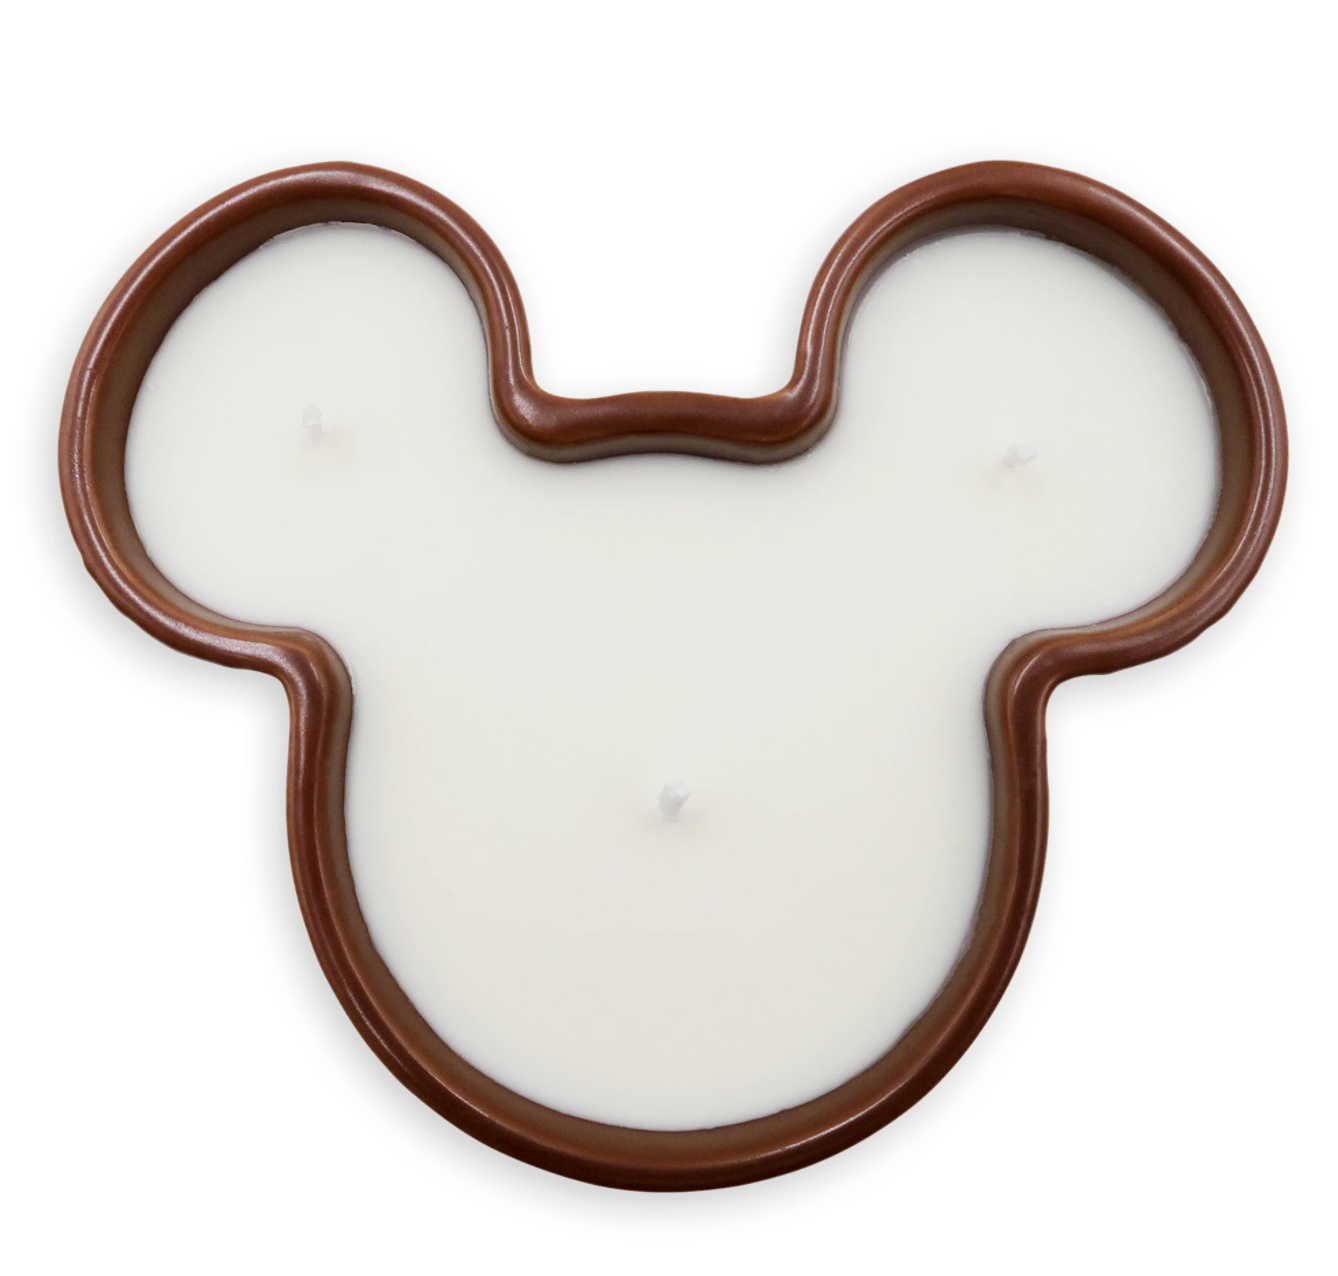 the mickey shaped candle